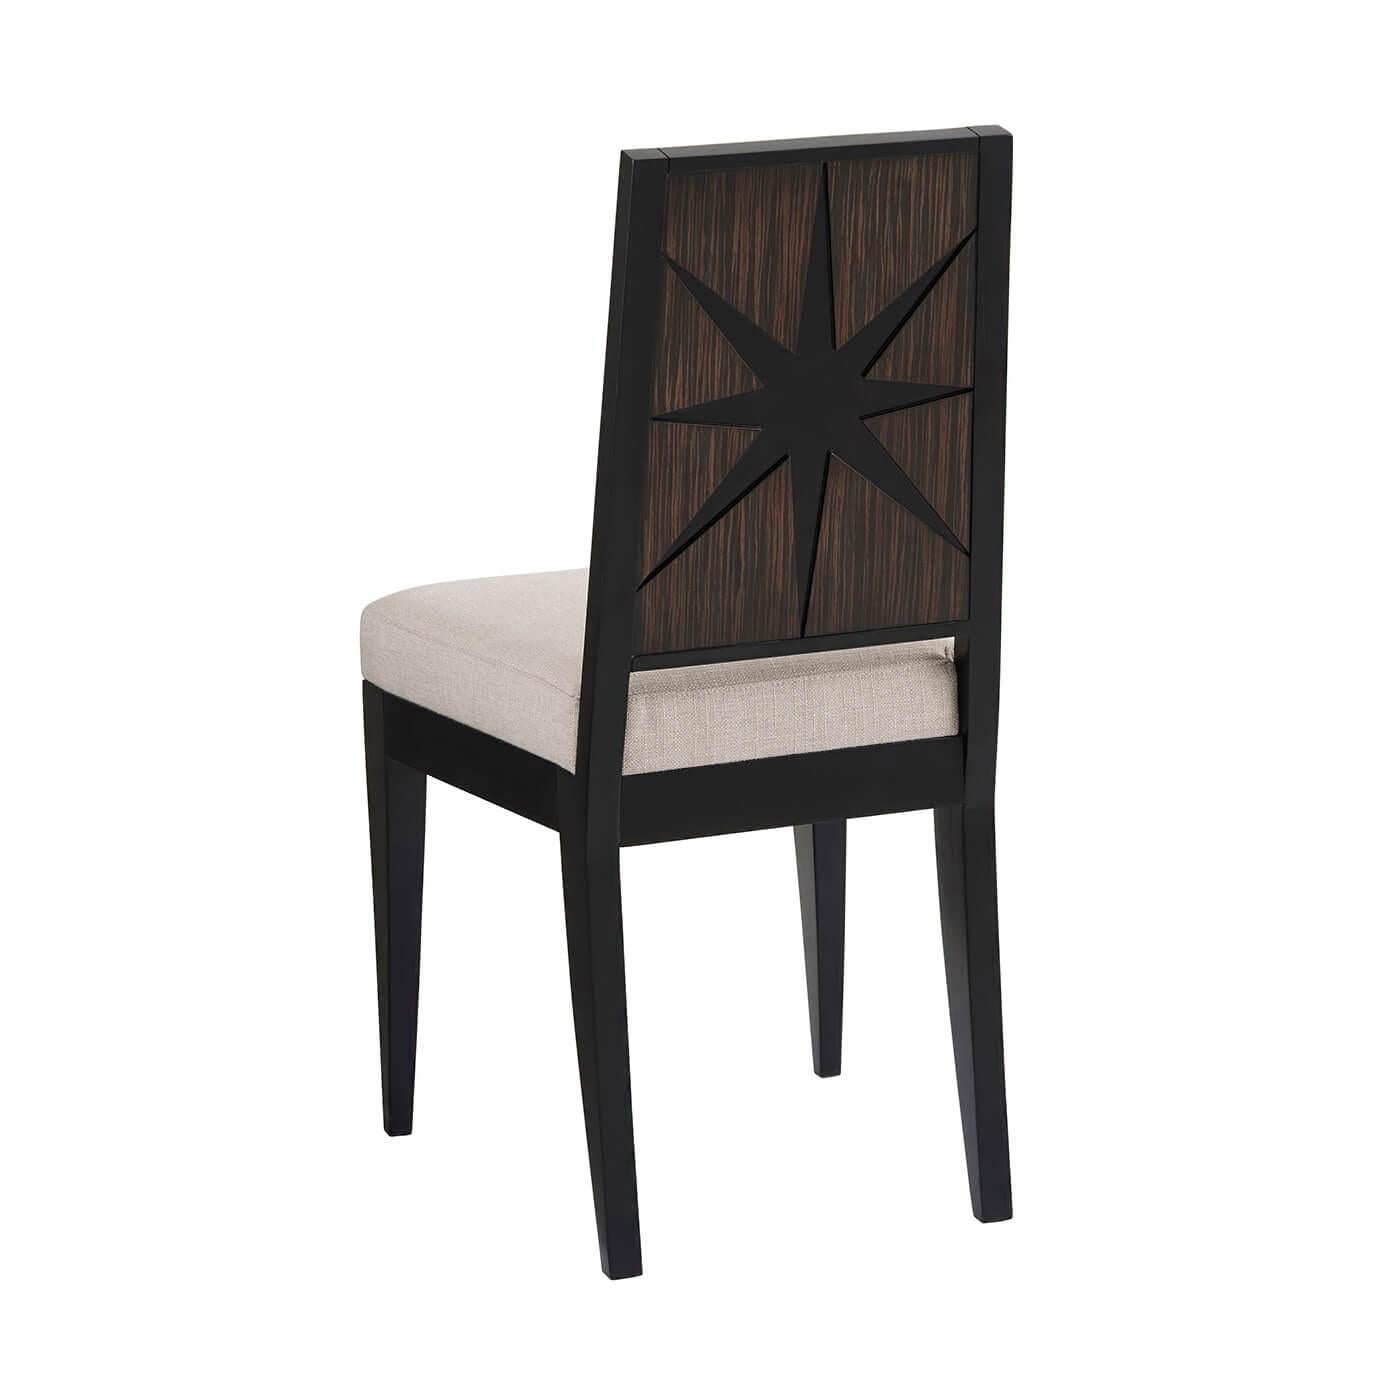 Midcentury side chair with ebonized beechwood, cut star relief back with simulated ebony veneers, an upholstered cushion seat and square tapered sabre legs.

Dimensions: 17